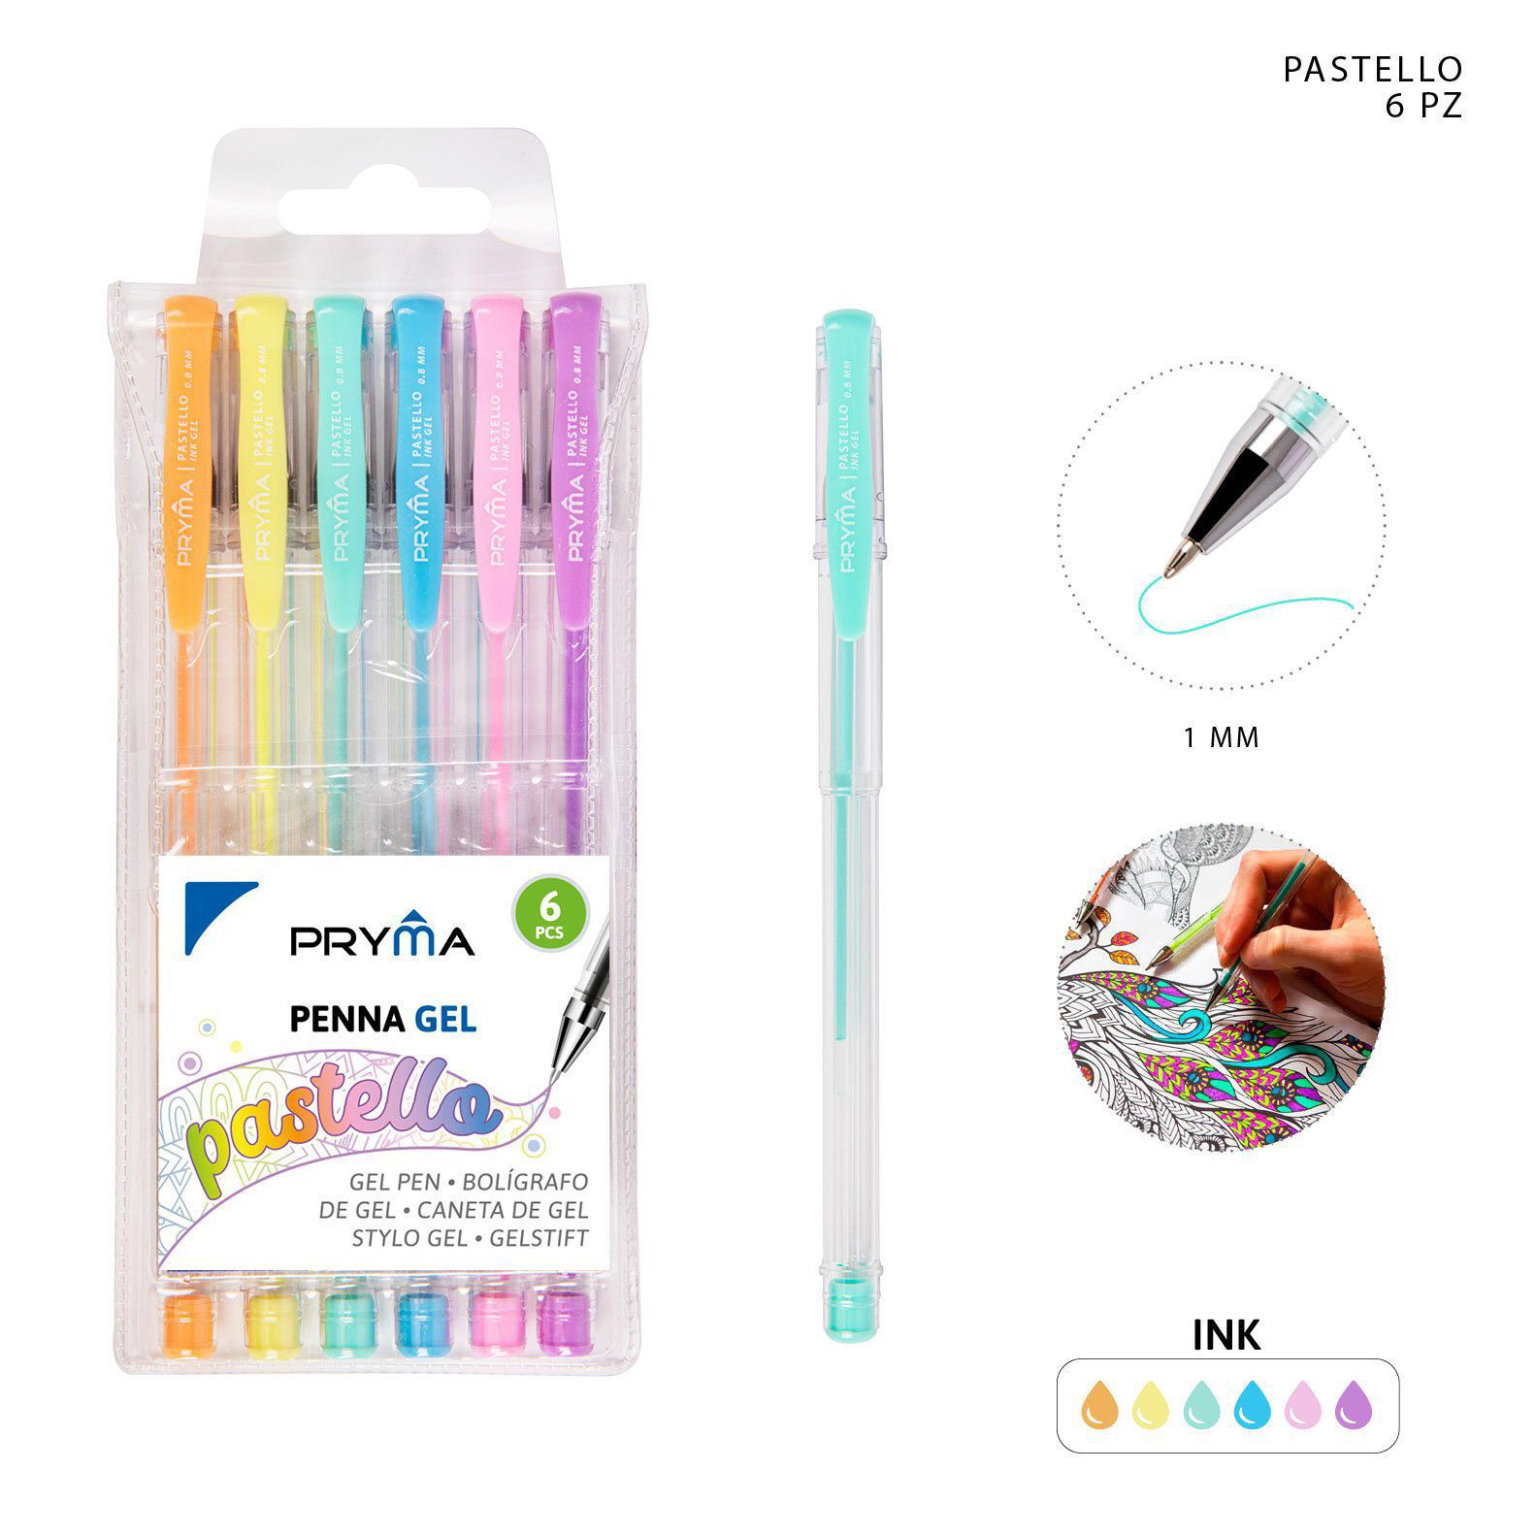 PRYMA penne gel color pastello 6 – Shopping Store